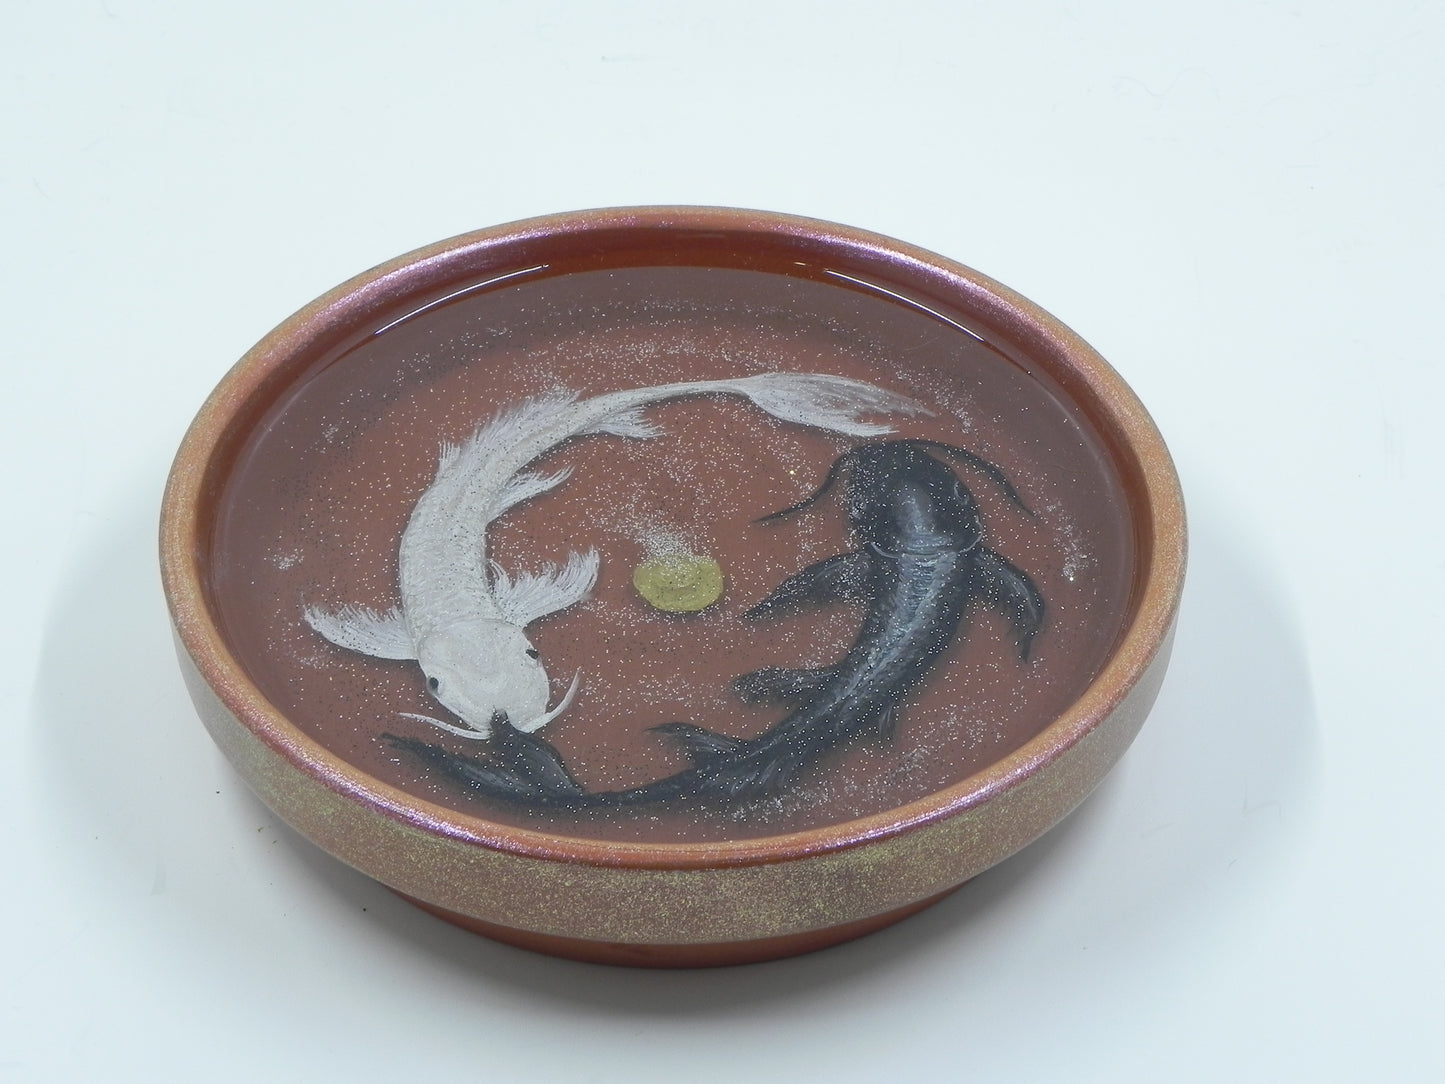 "Black and White intertwined Koi fish" 3D resin plate